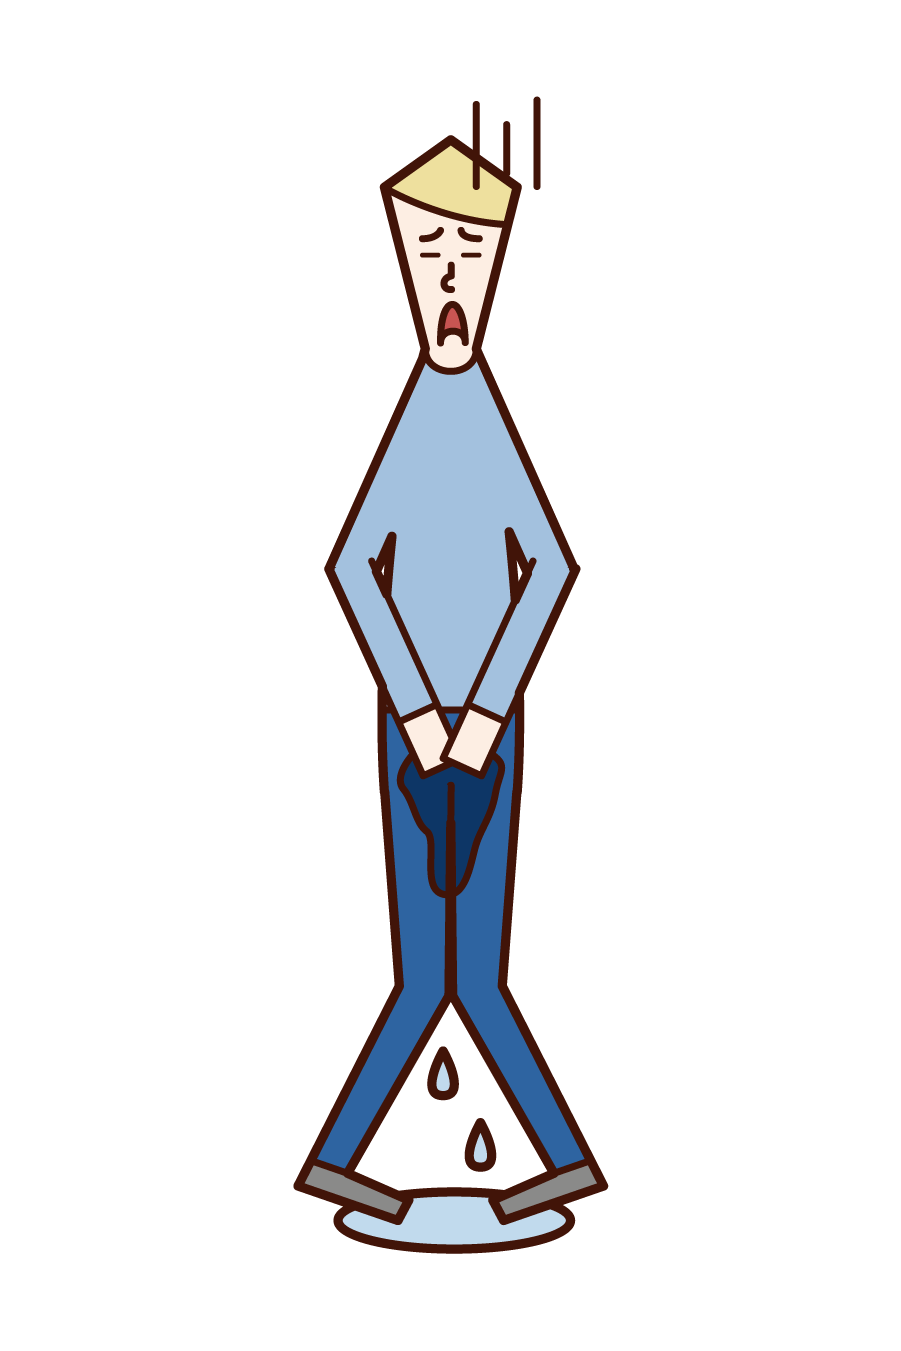 Illustration of a person (man) who leaked urinary incontinence